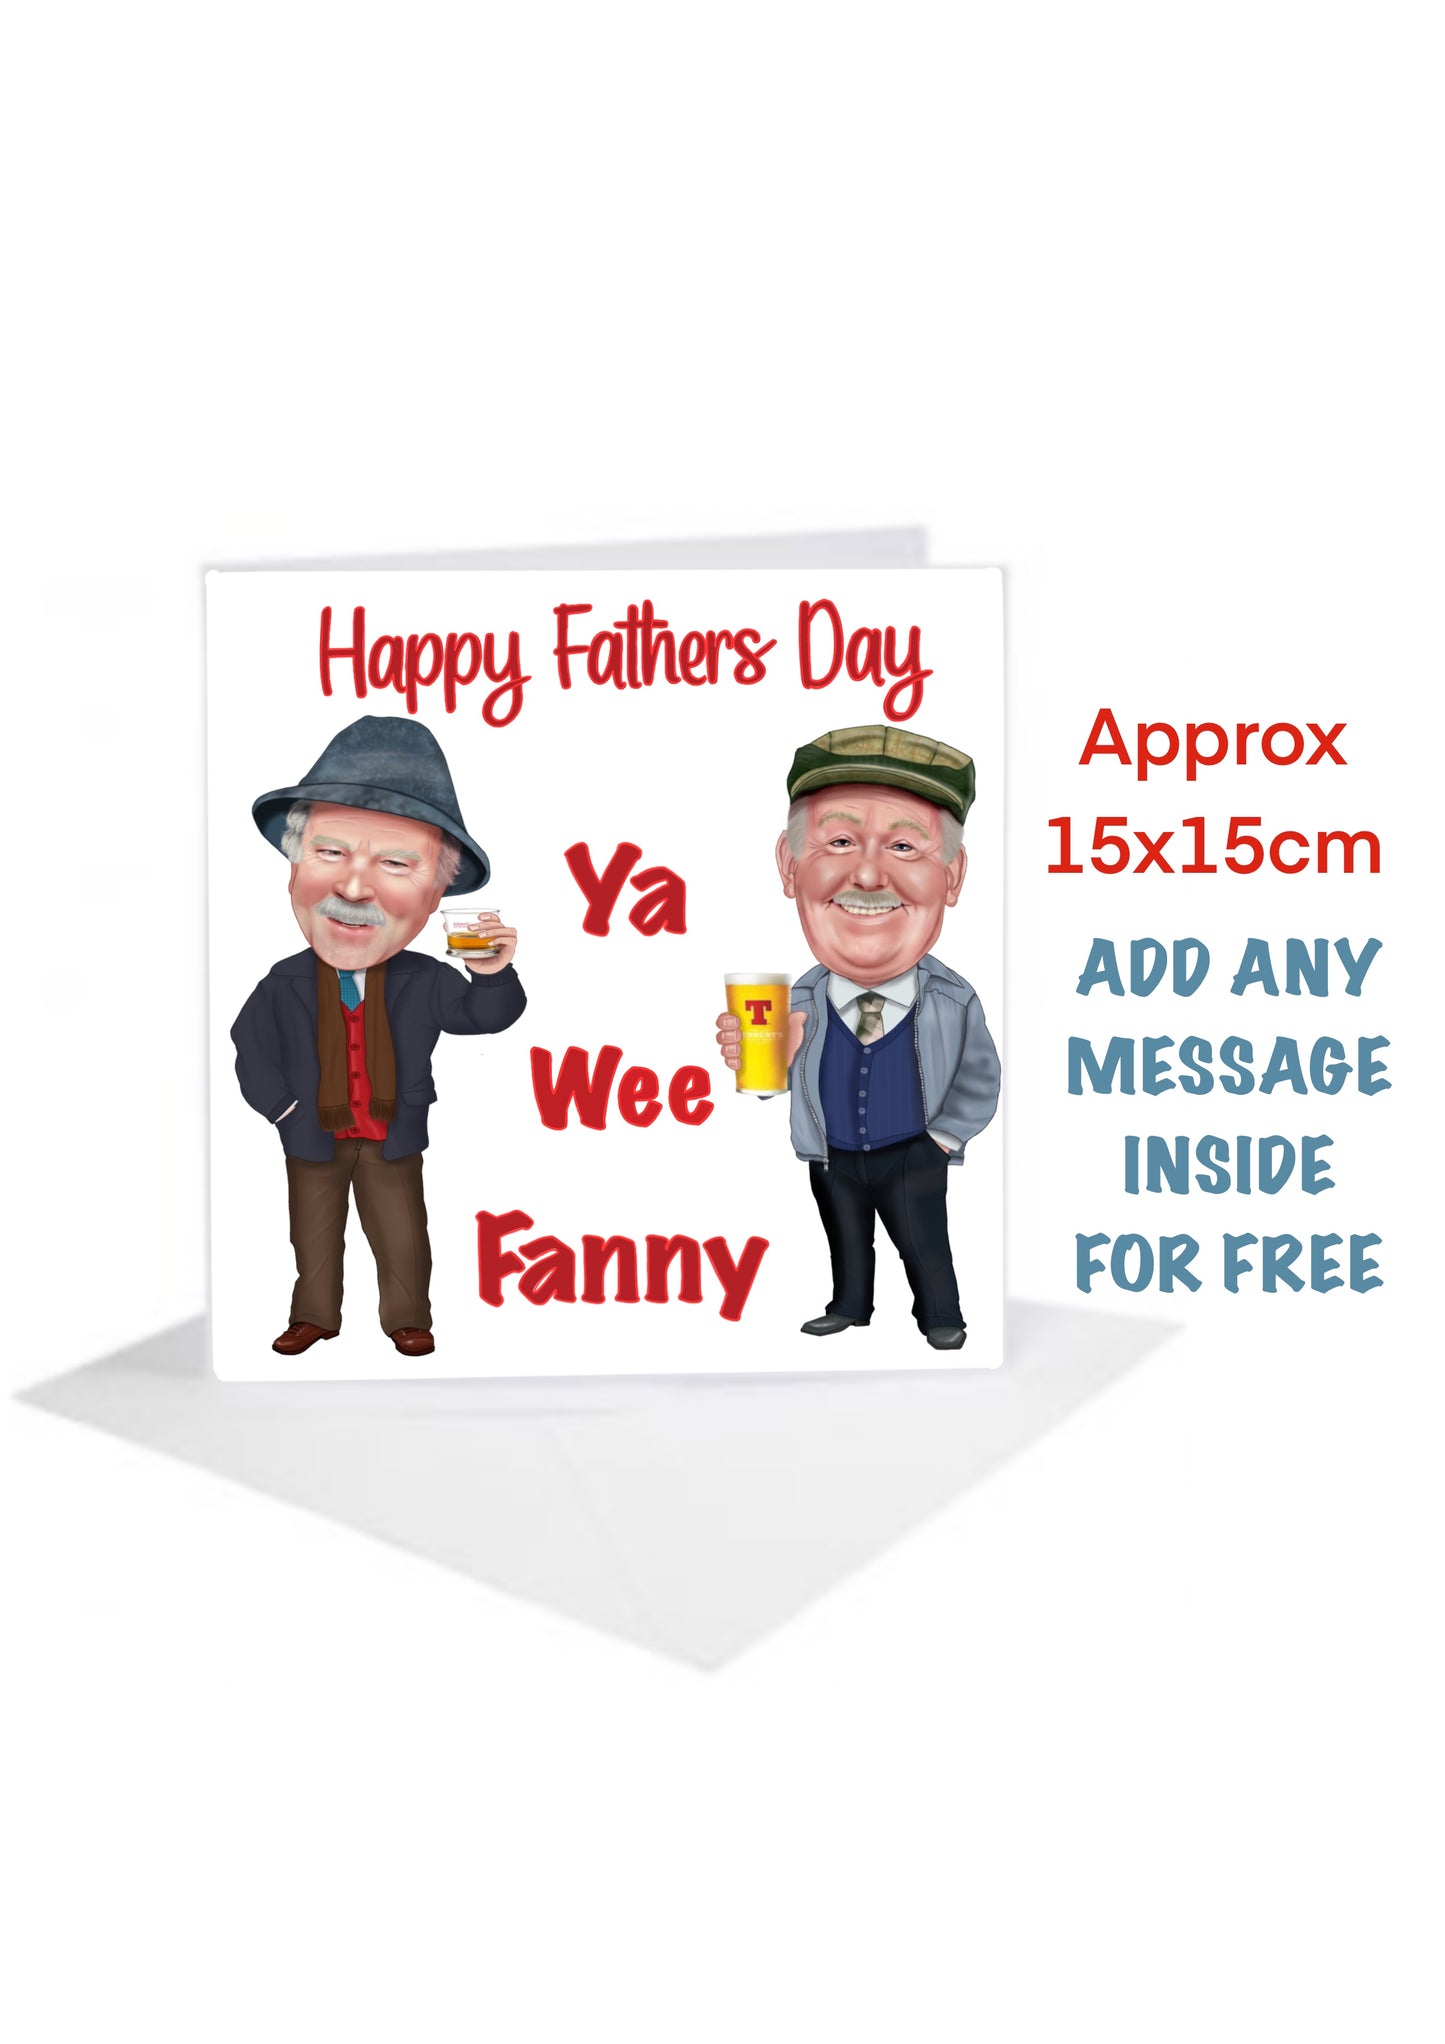 Fathers Day Cards-Cards Still Game Ya Fanny